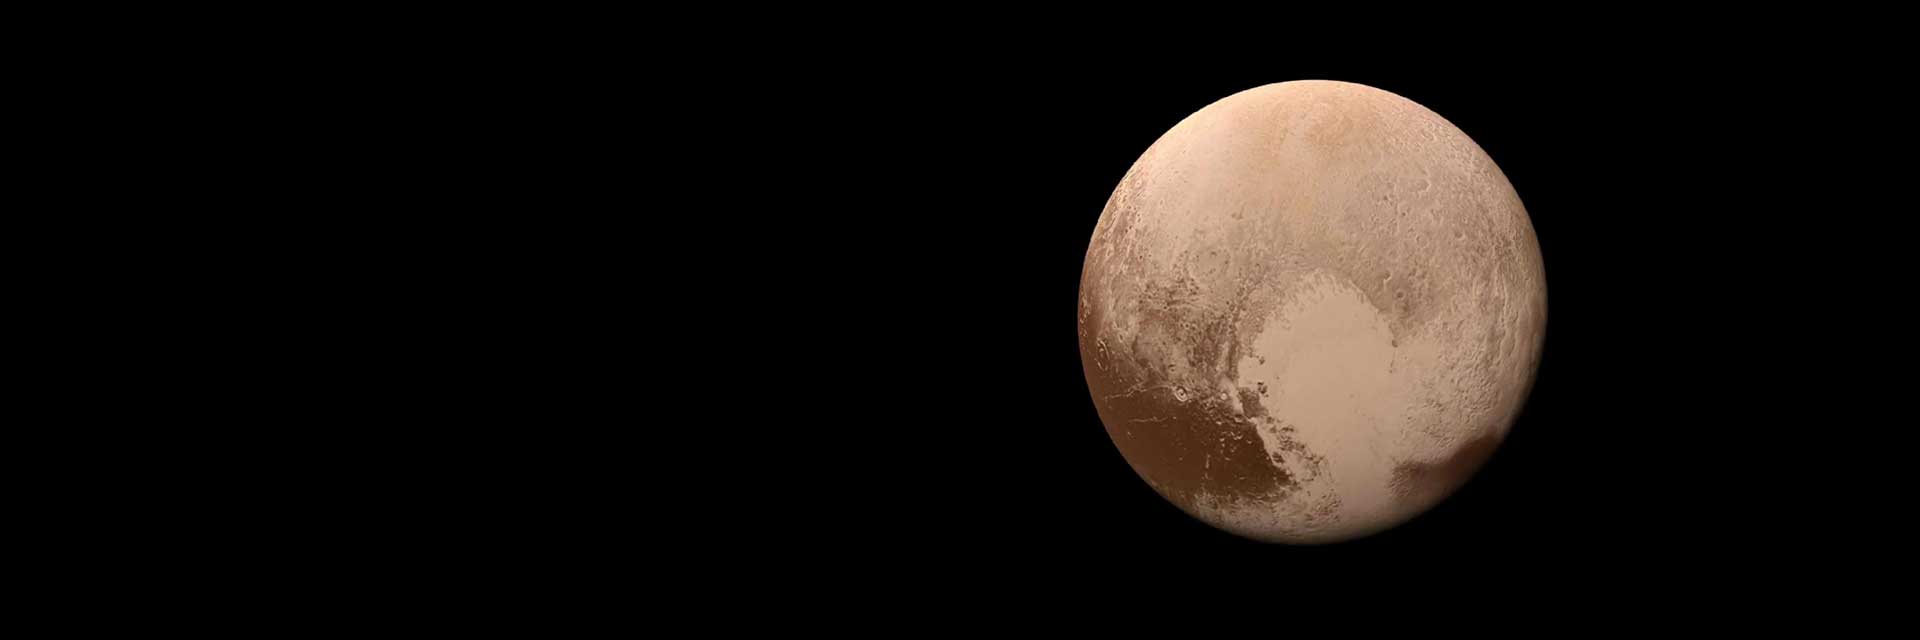 Dwarf planet Pluto with a heart-shaped feature showing.